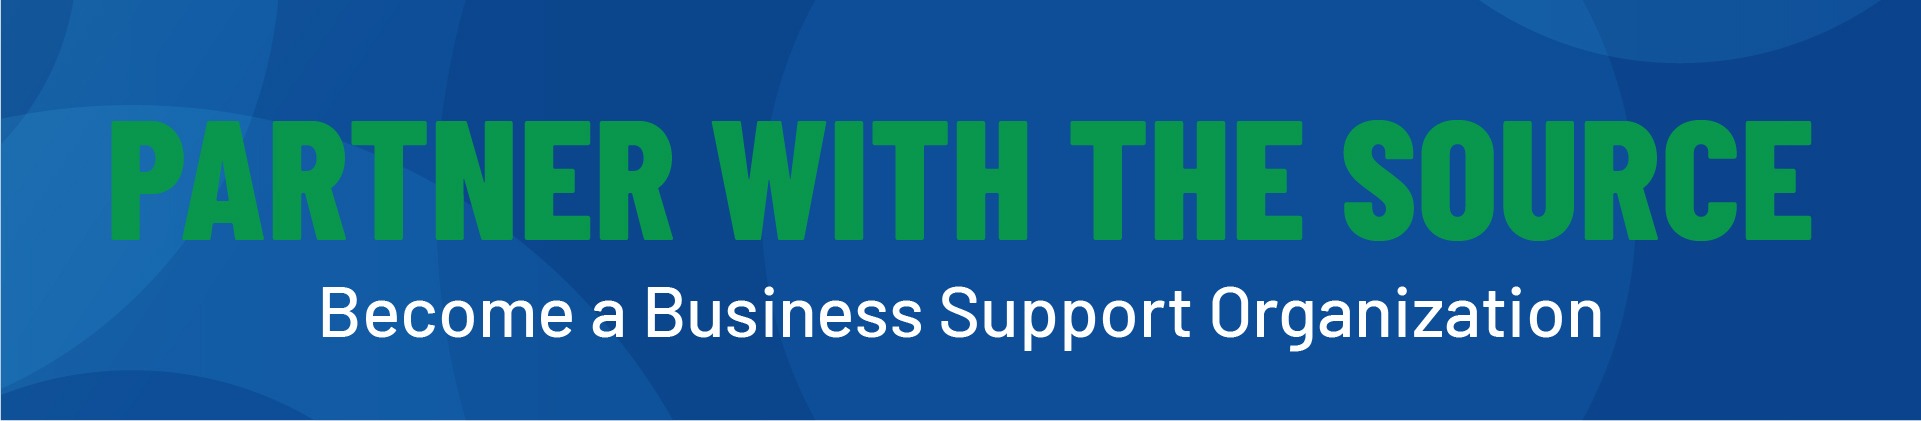 Partner with The Source: Become a Business Support Organization